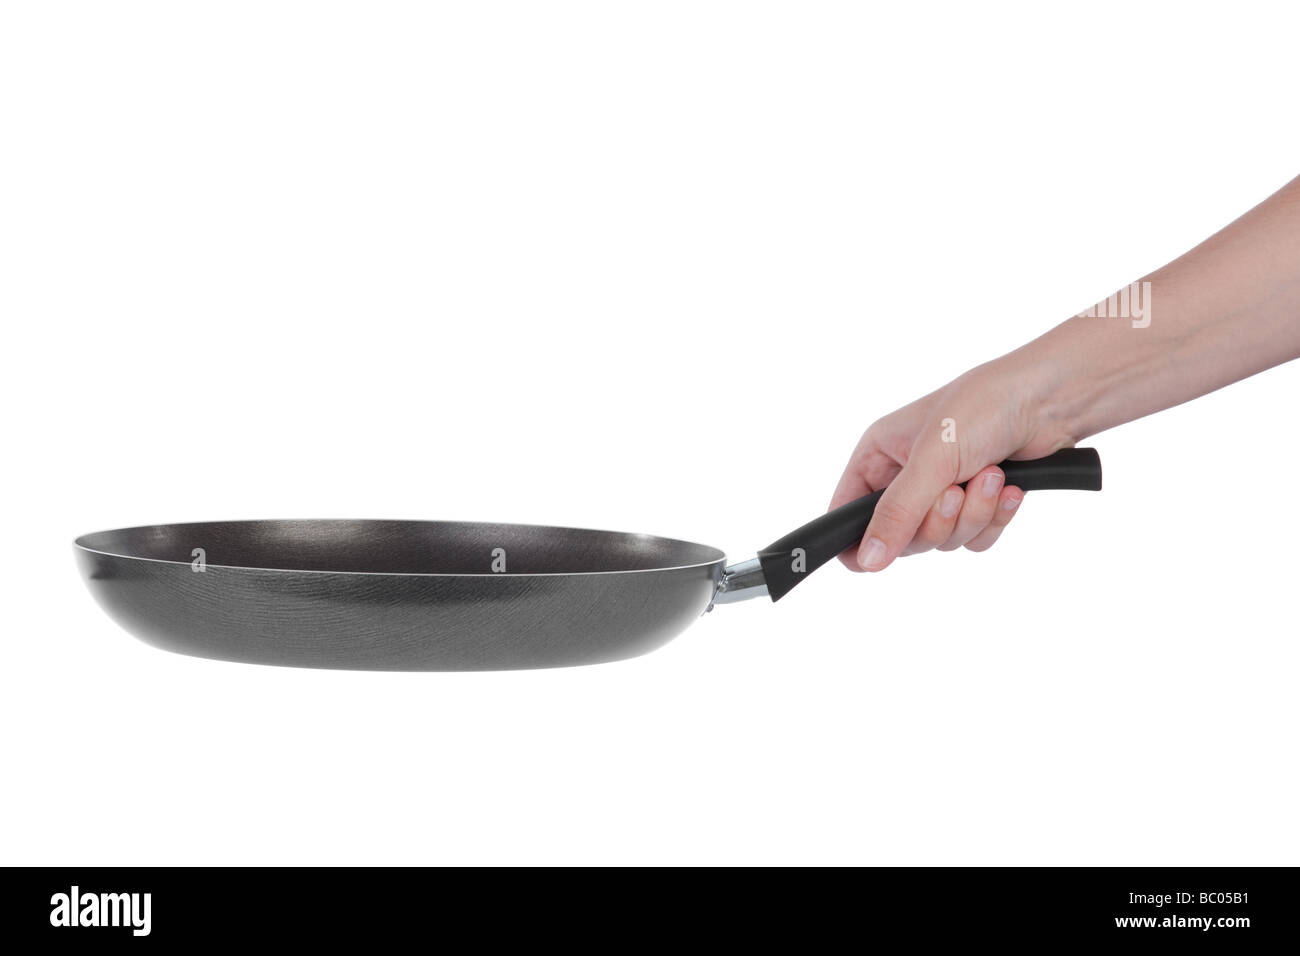 Hand holding a Teflon frying pan isolated on white background Stock Photo